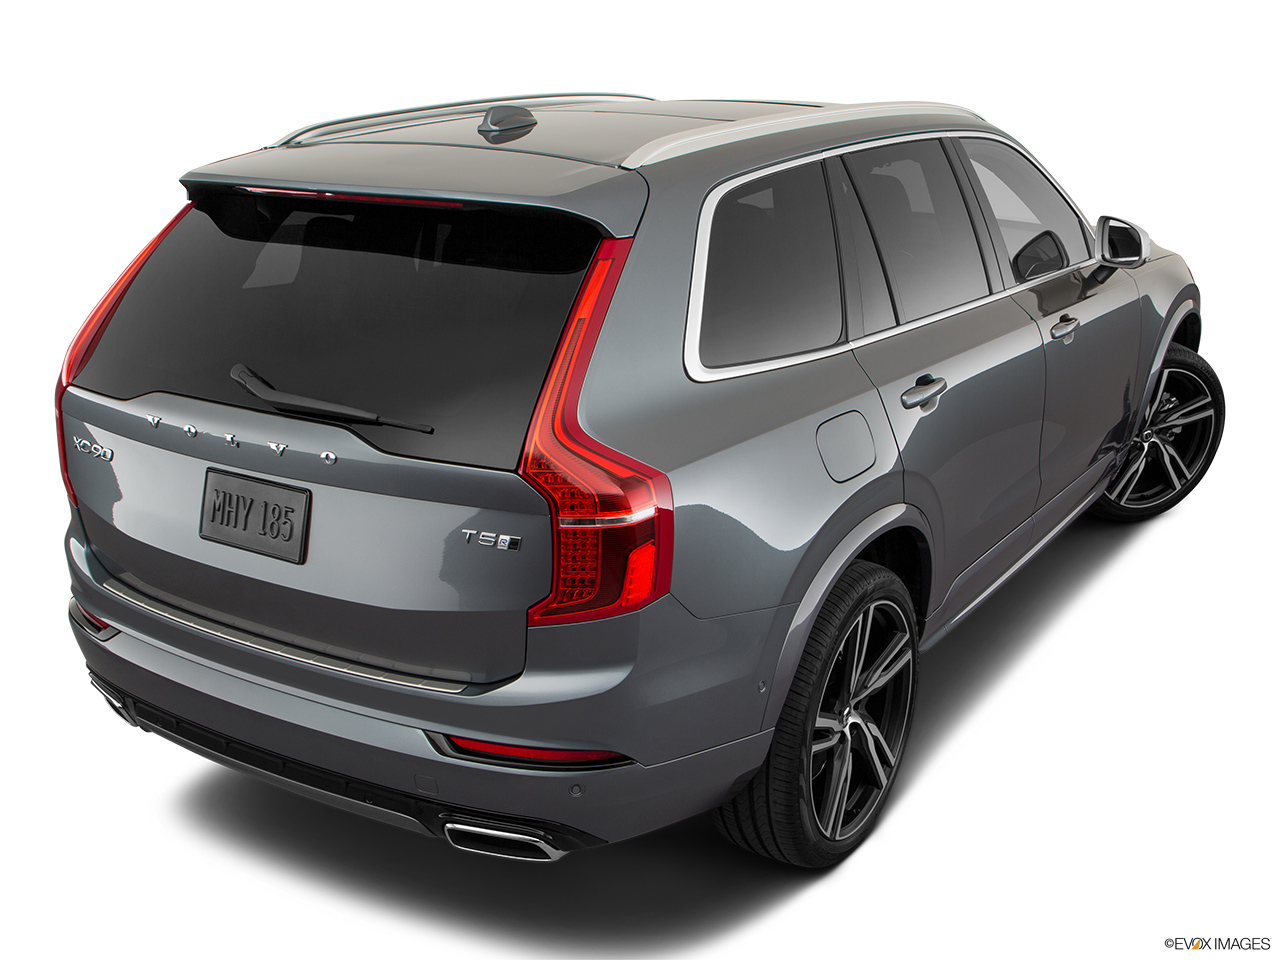 2019 Volvo XC90  T5 AWD R-Design Rear 3/4 angle view. 